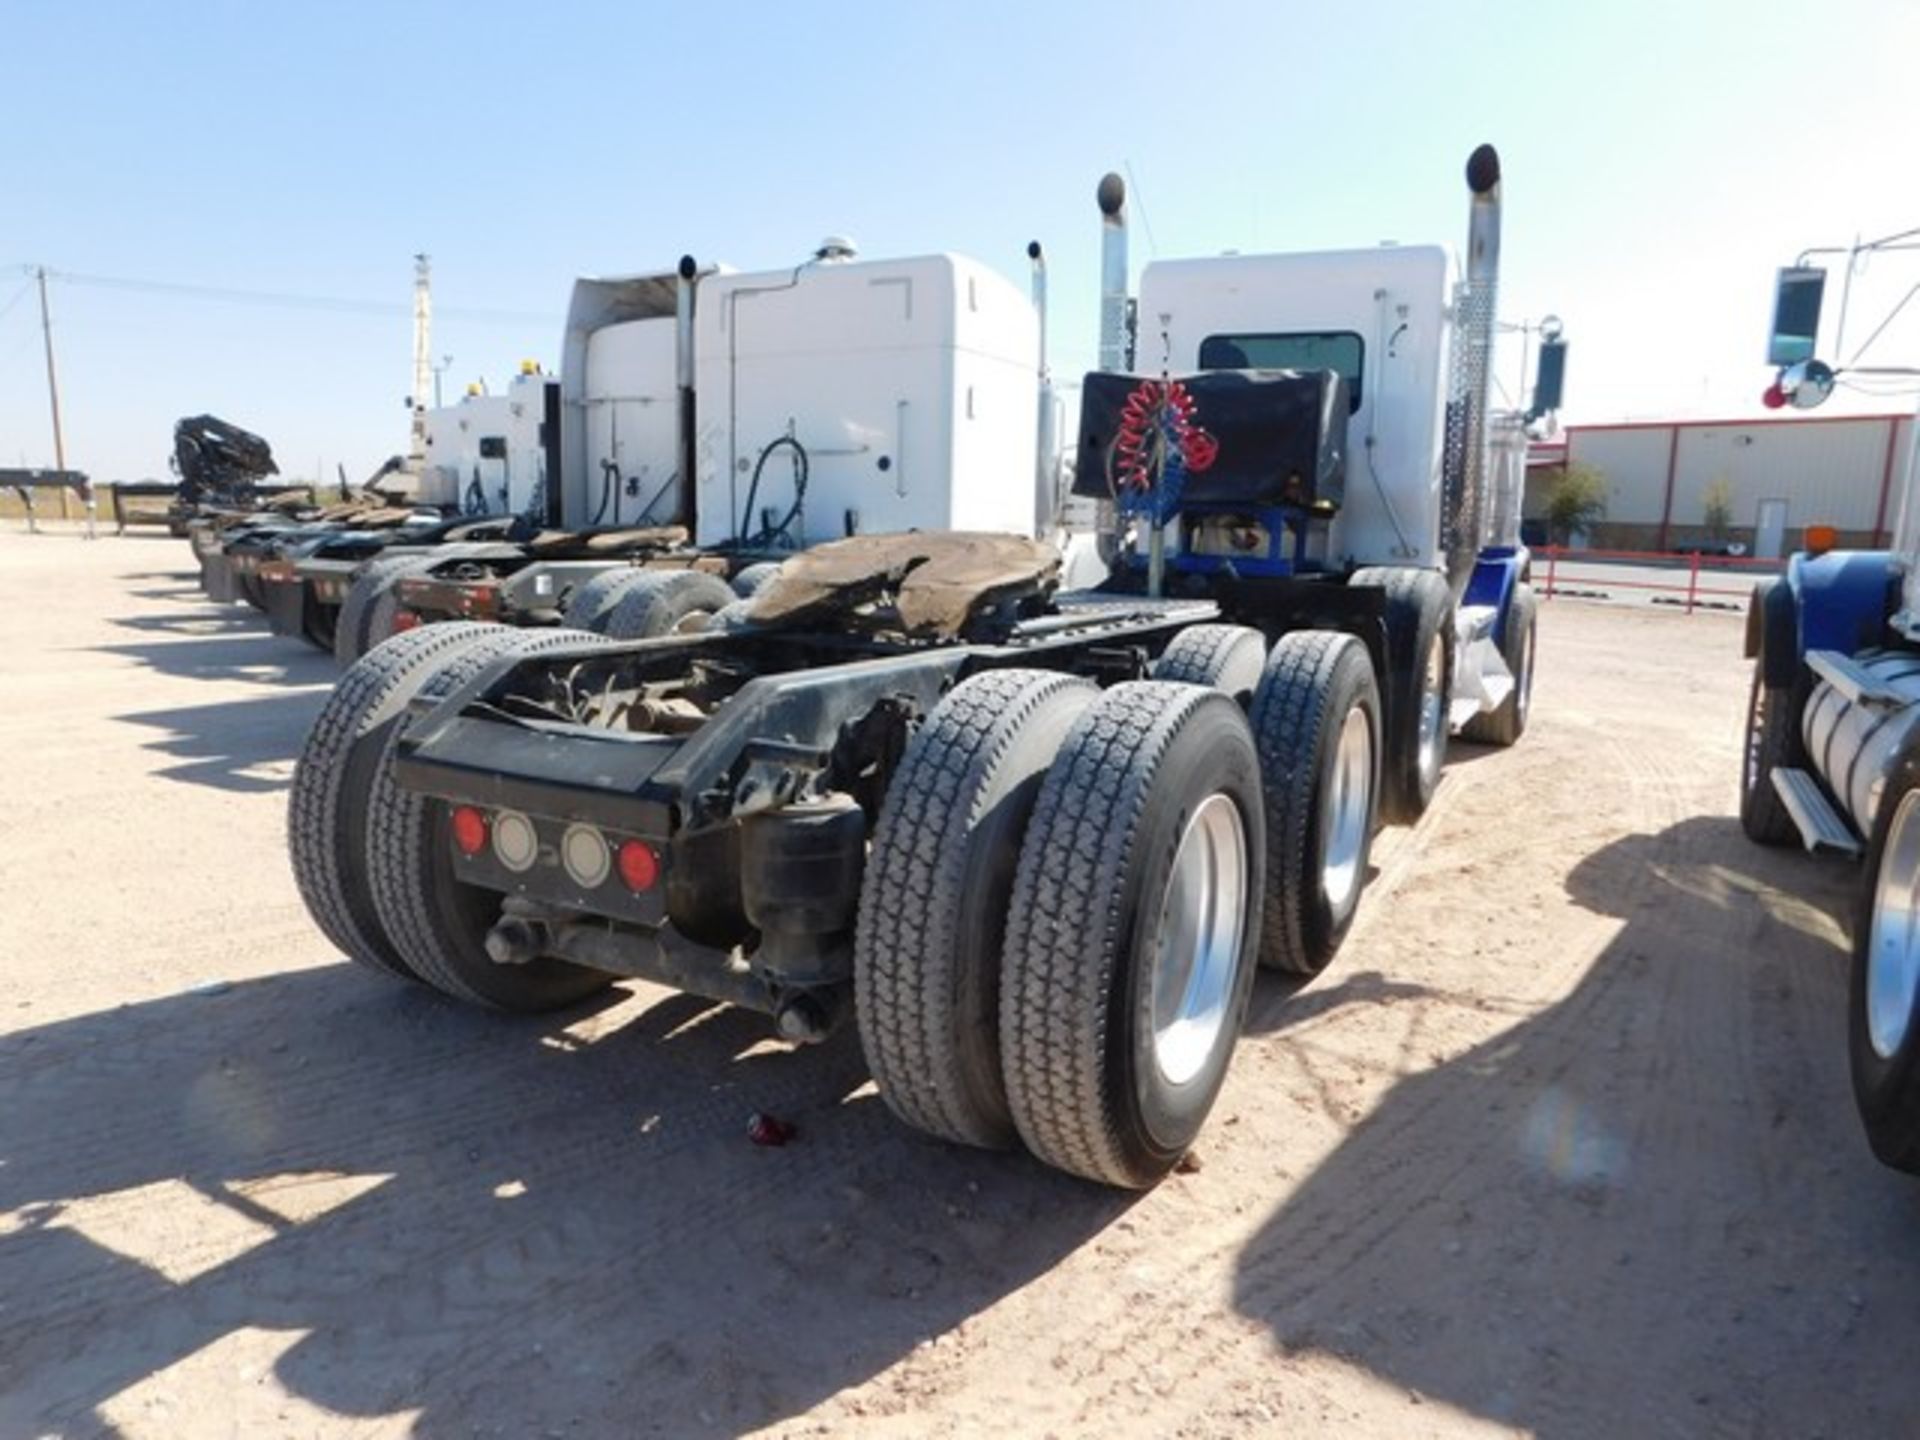 Located in YARD 1 - Midland, TX (2262) (X) 2012 KENWORTH T800 4 AXLE DAY CAB HAUL TRUCK, VIN- - Image 3 of 8